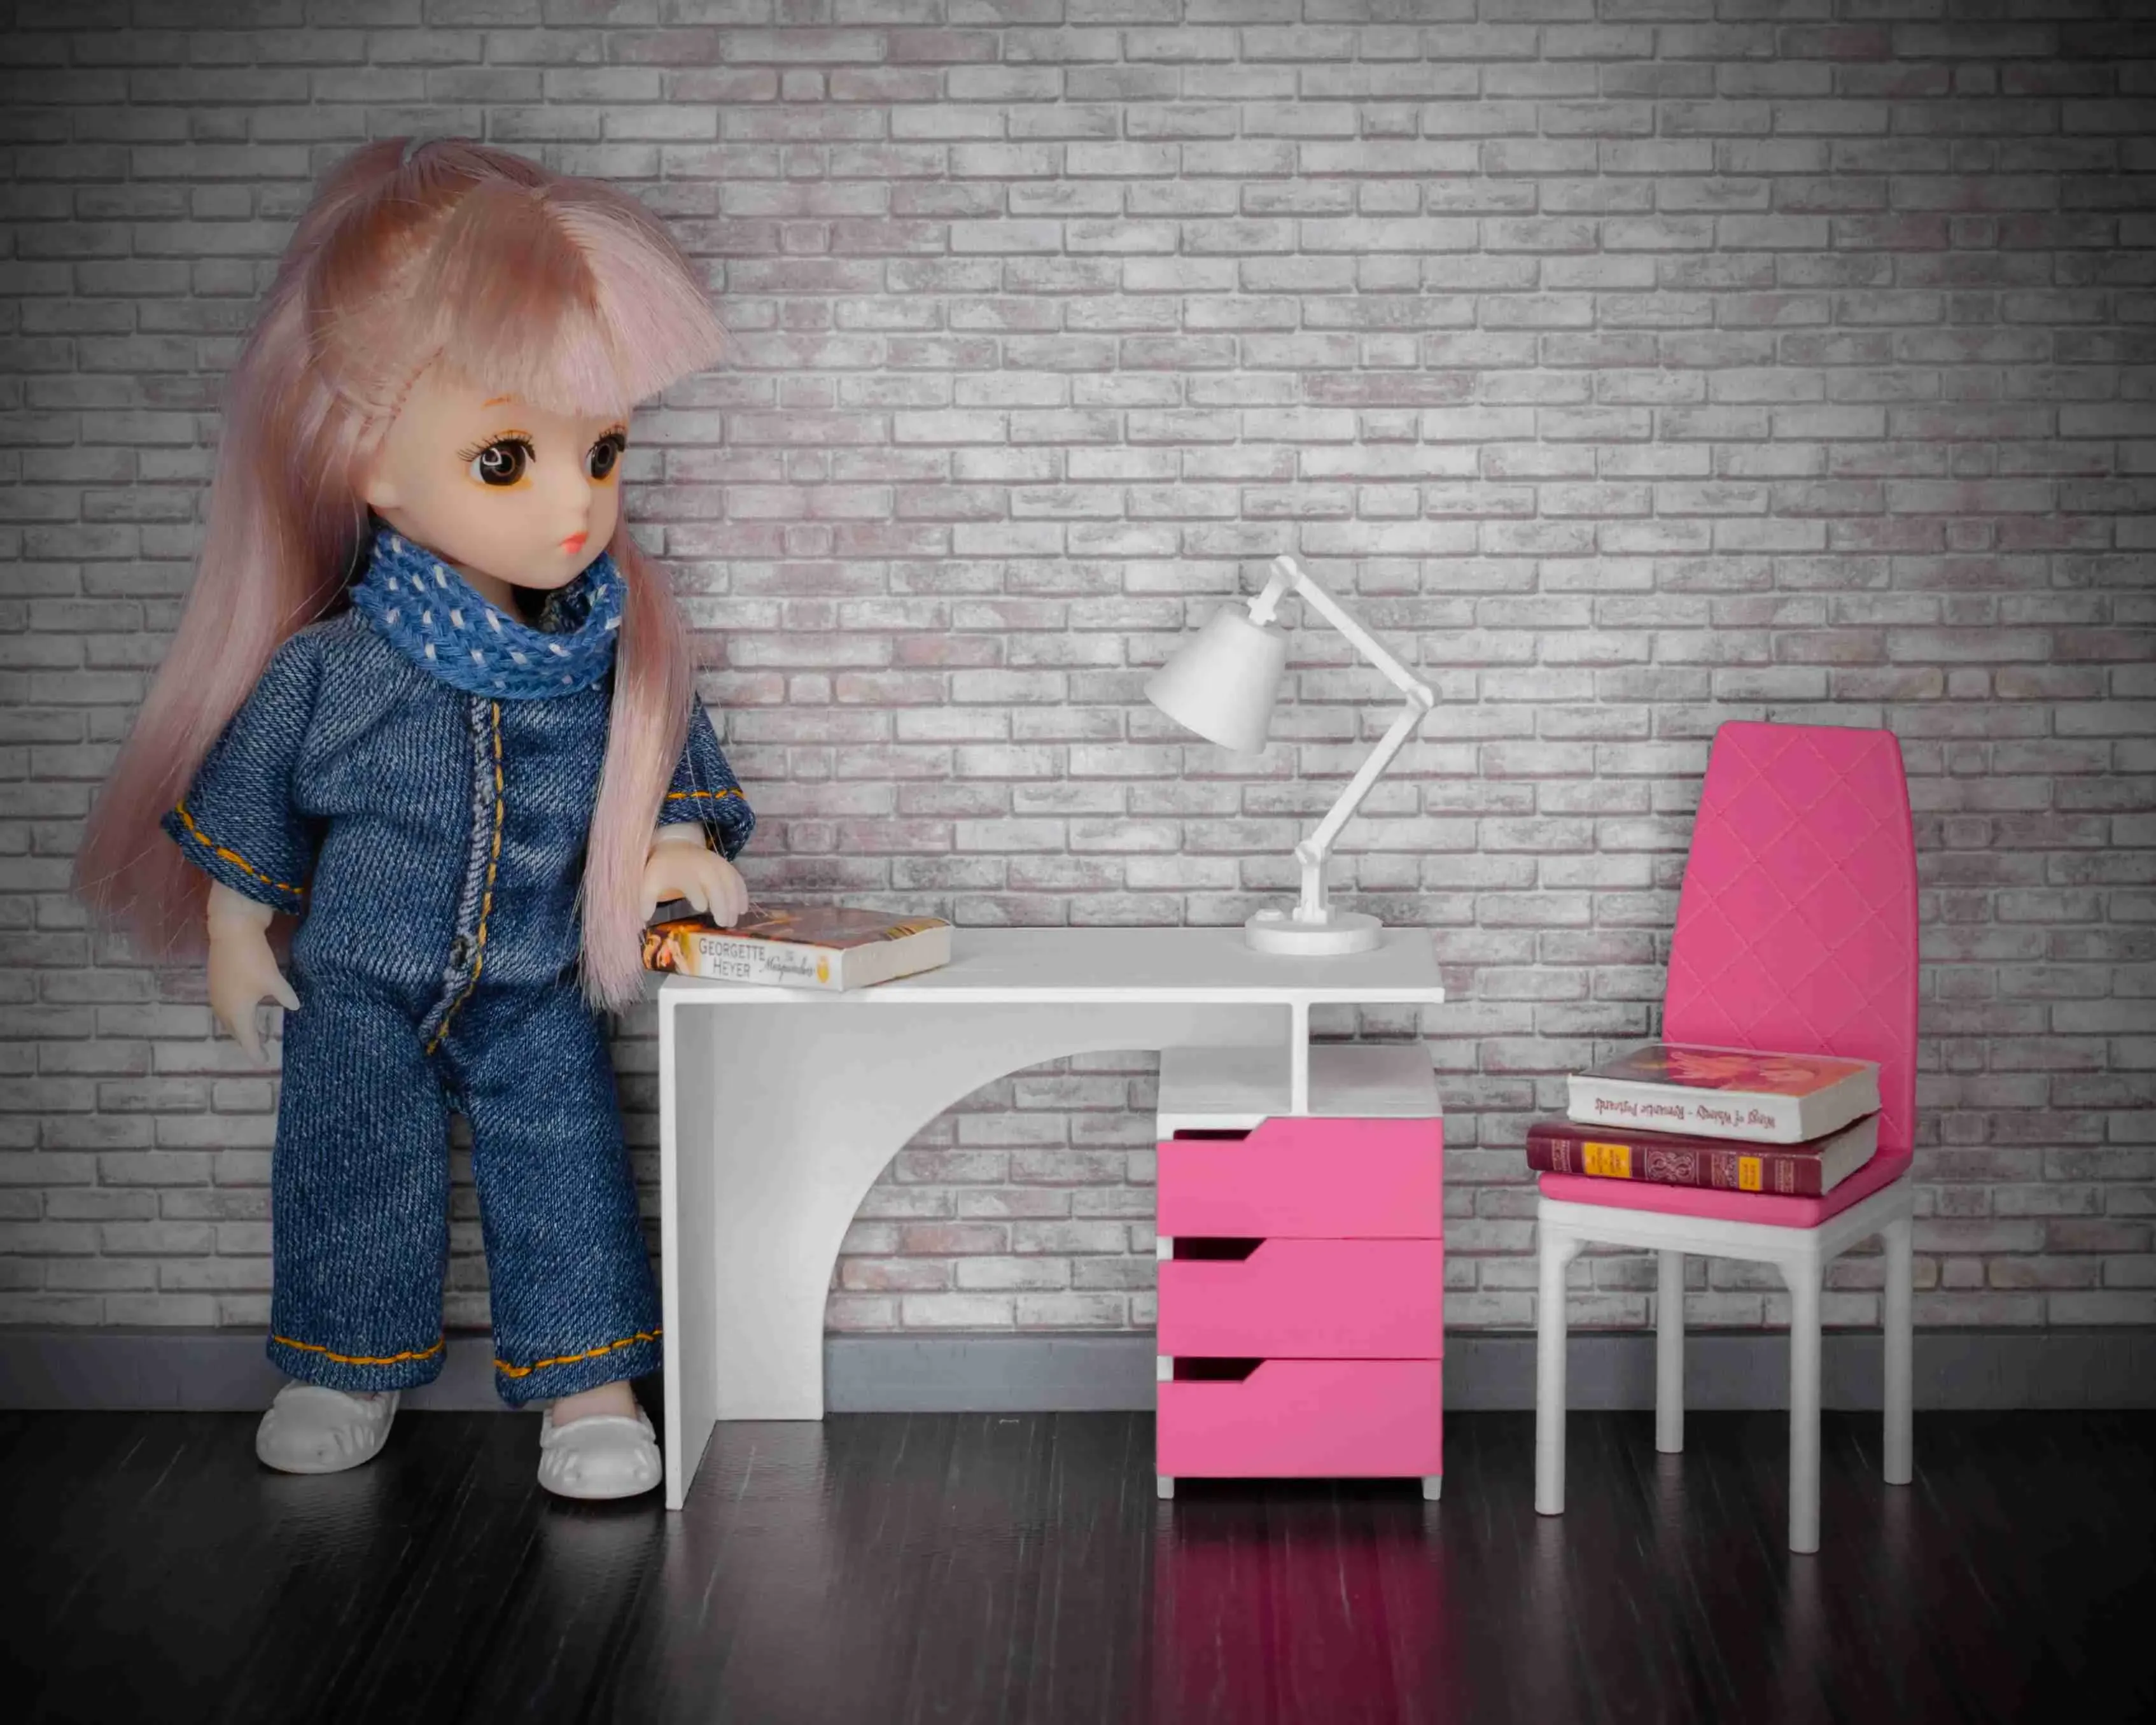 Modern 3-Drawer Computer Desk 1:12 scale for Dollhouses